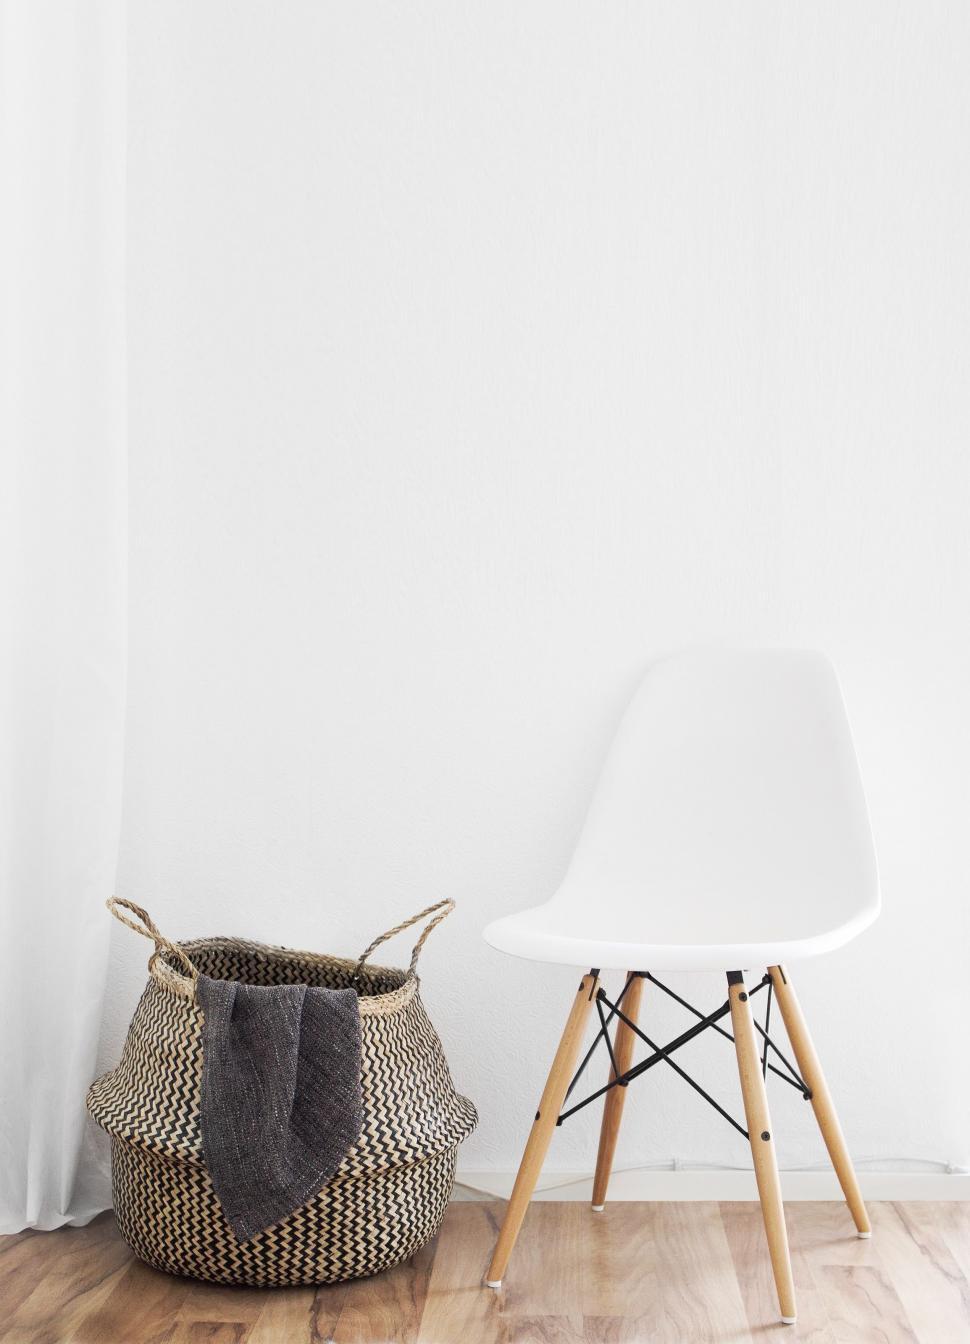 Free Image of White Chair and Basket on Wooden Floor 